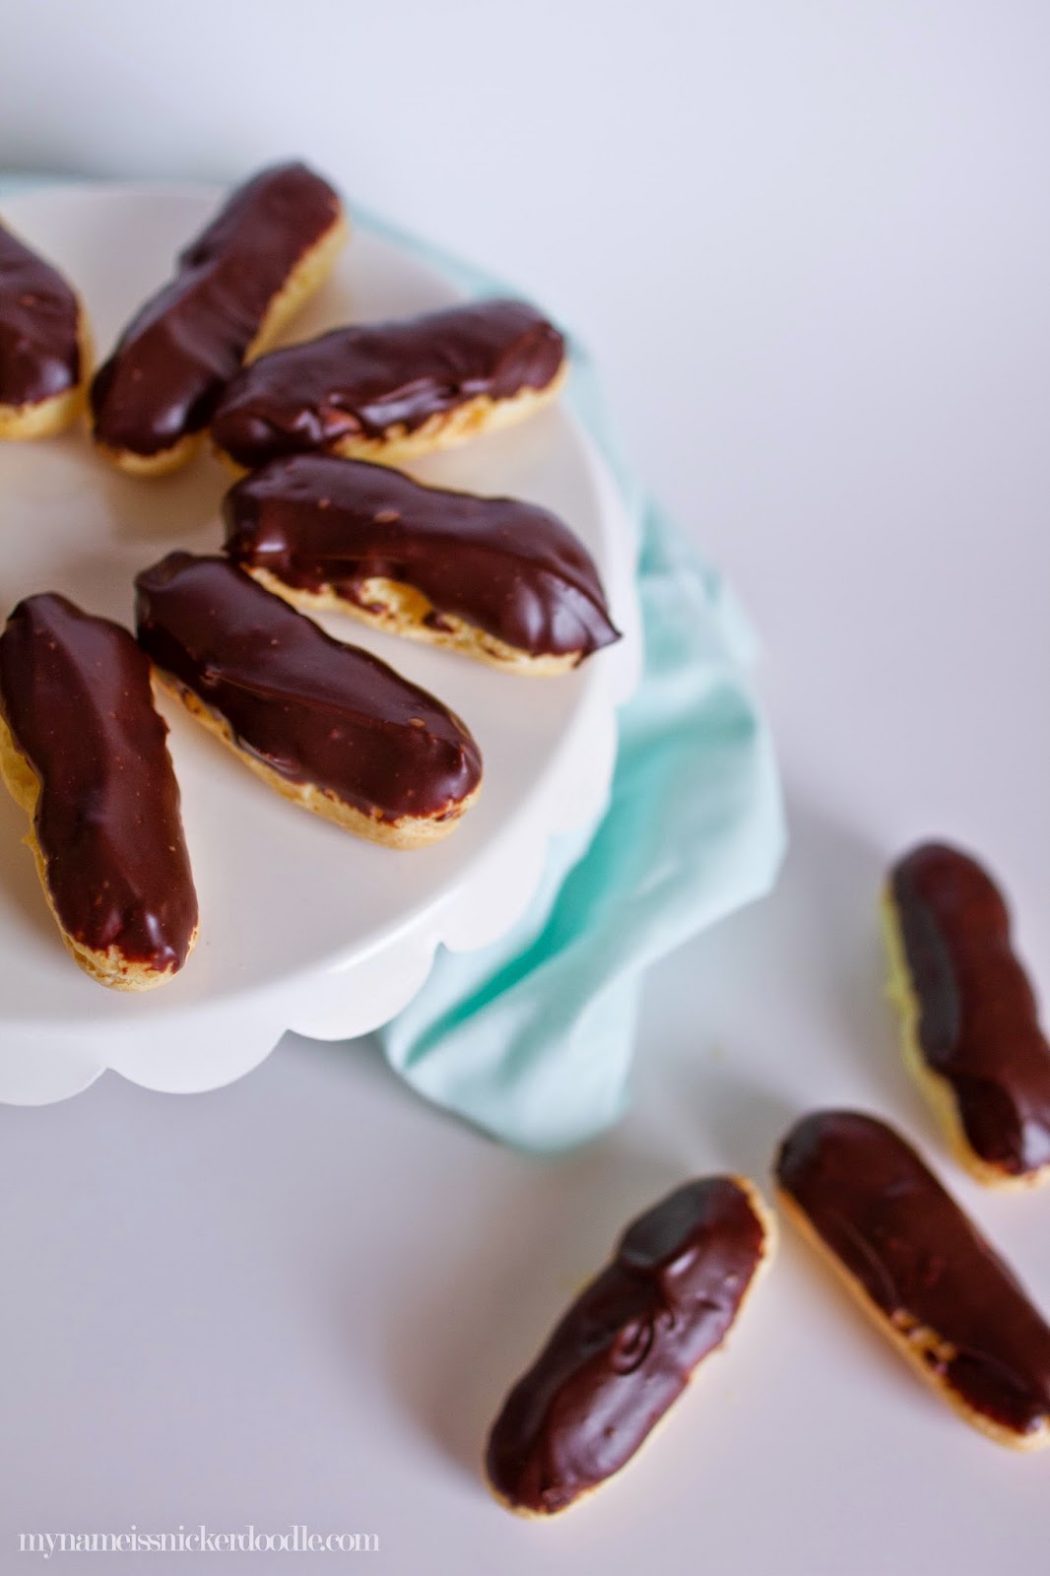 French-Pastry-Mini-Chocolate-Elairs-With-Vanilla-Cream-Filling